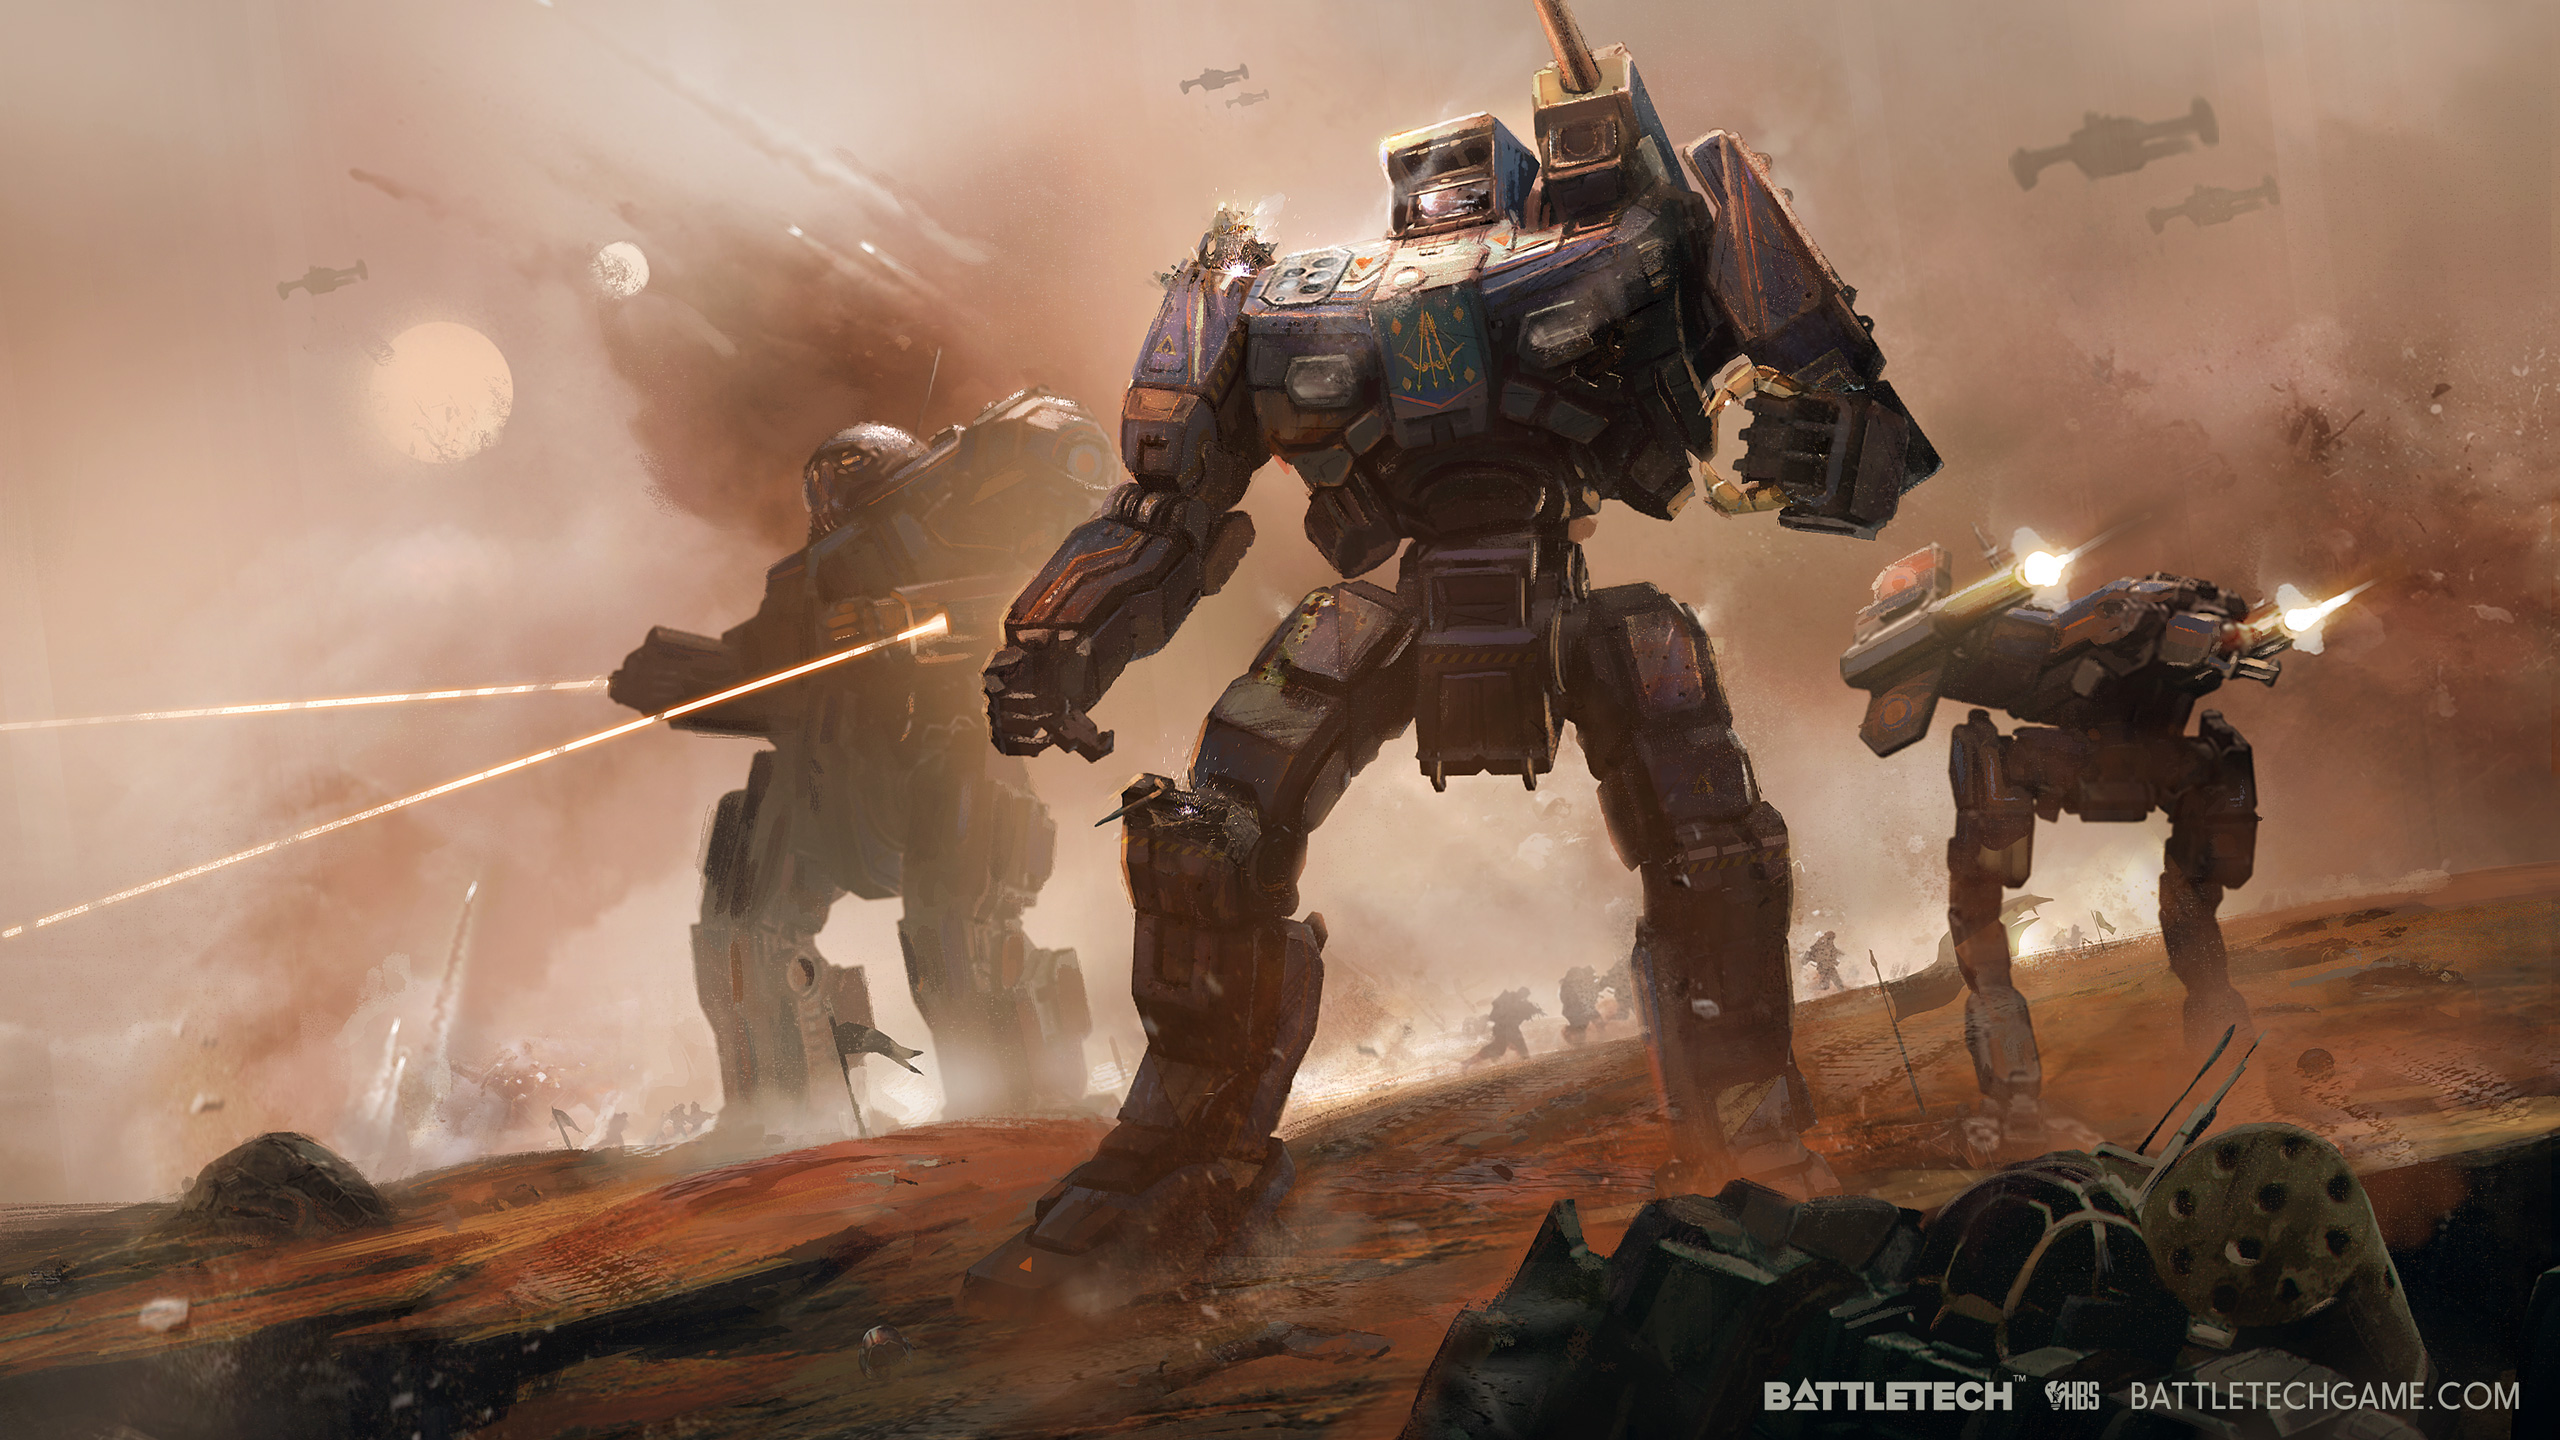 General 2560x1440 Battletech Giant Robot video game art PC gaming science fiction